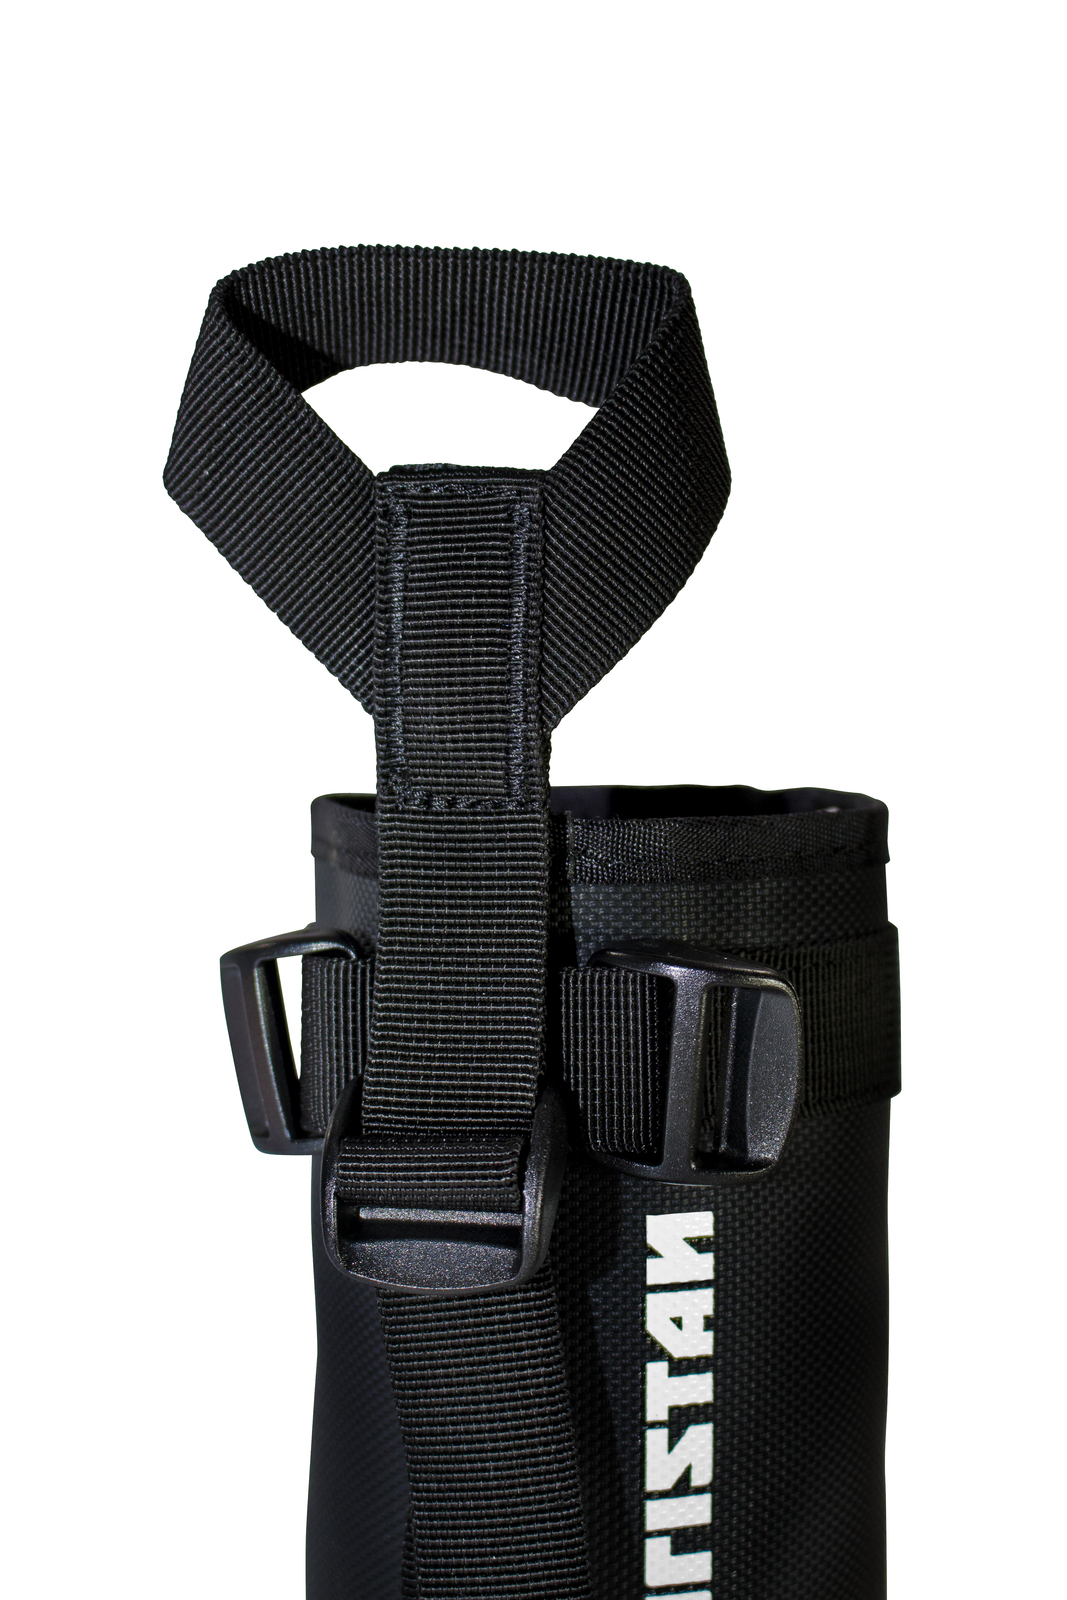 LUBO-001 Enduristan Bottle Holster NEXT DAY DELIVERY